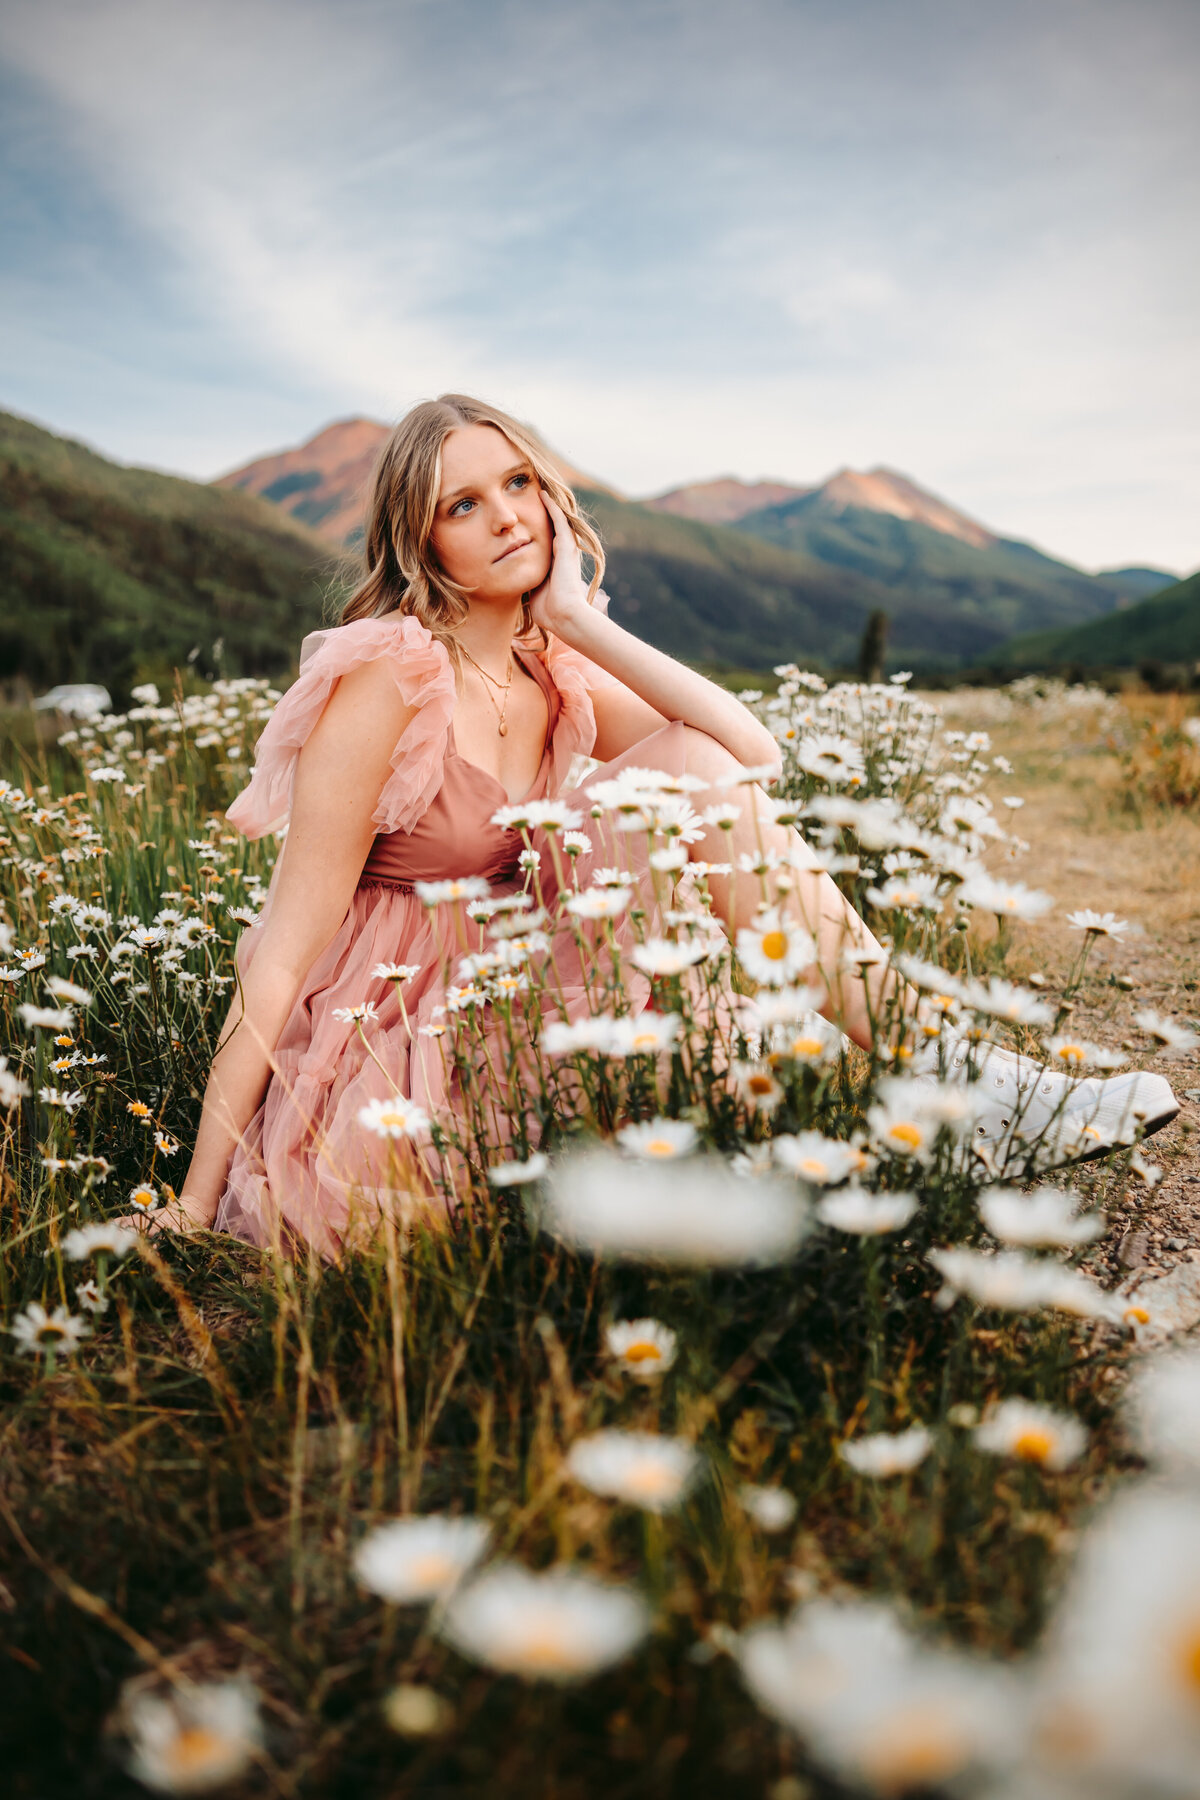 Allie poses in a field of wildflowers for her Montrose senior pictures.